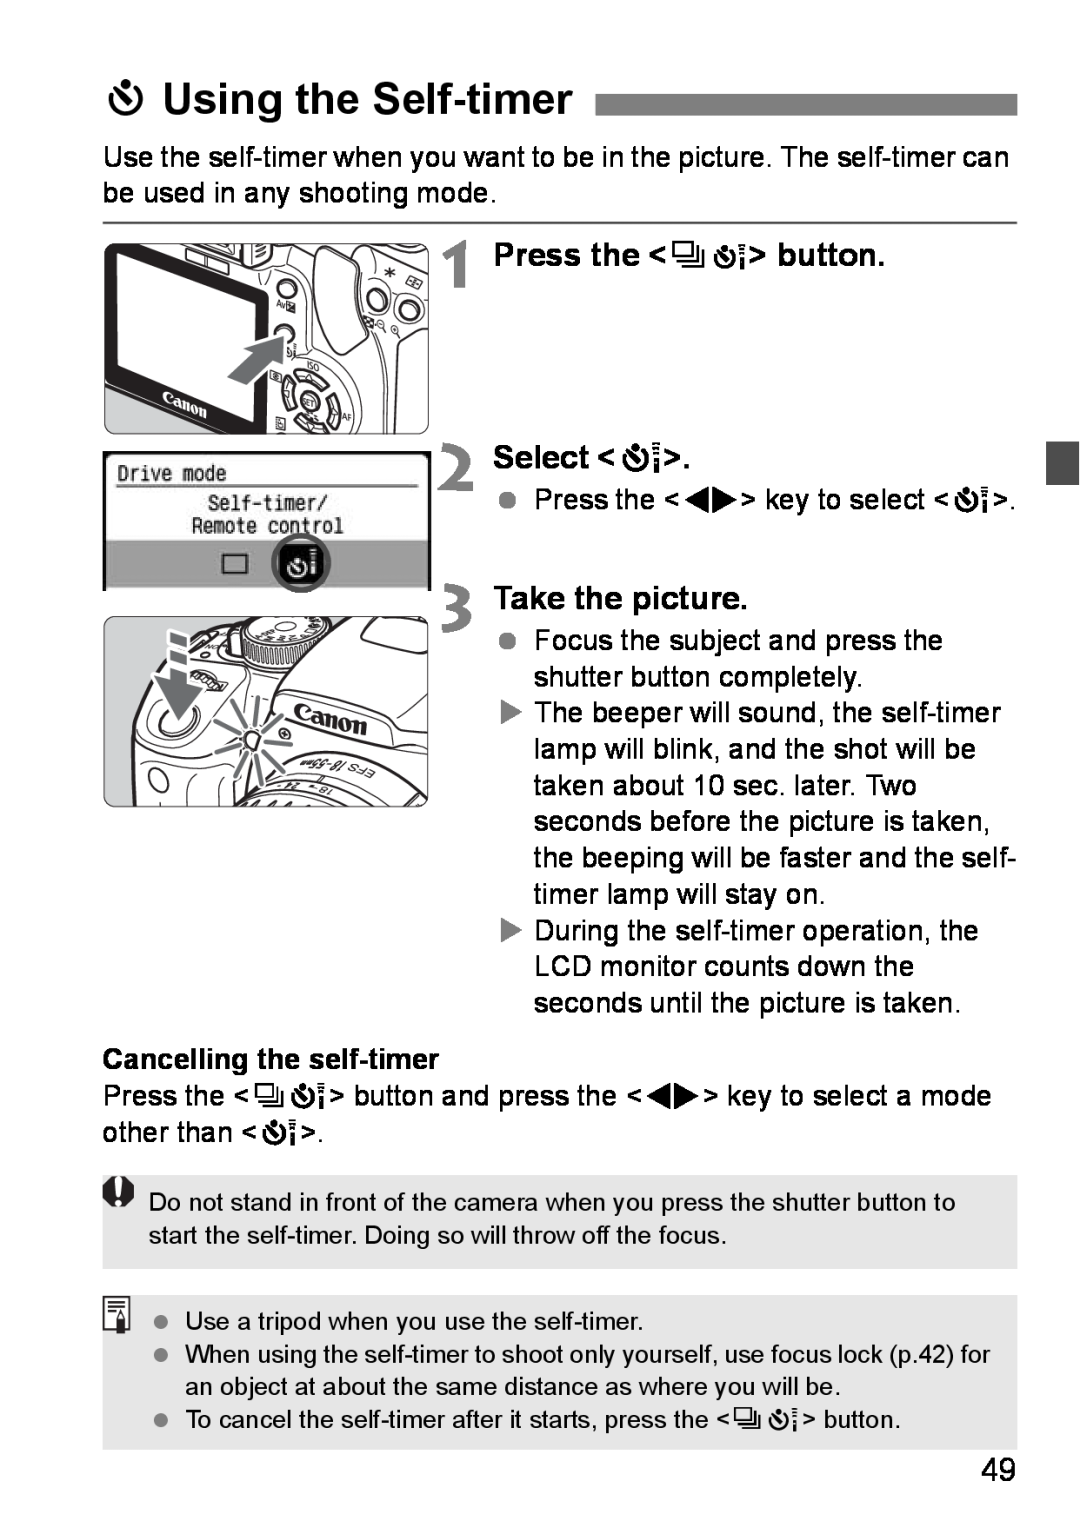 Canon EOS DIGITAL REBEL XTI instruction manual jUsing the Self-timer, Press the iQ button Select Q, Take the picture 